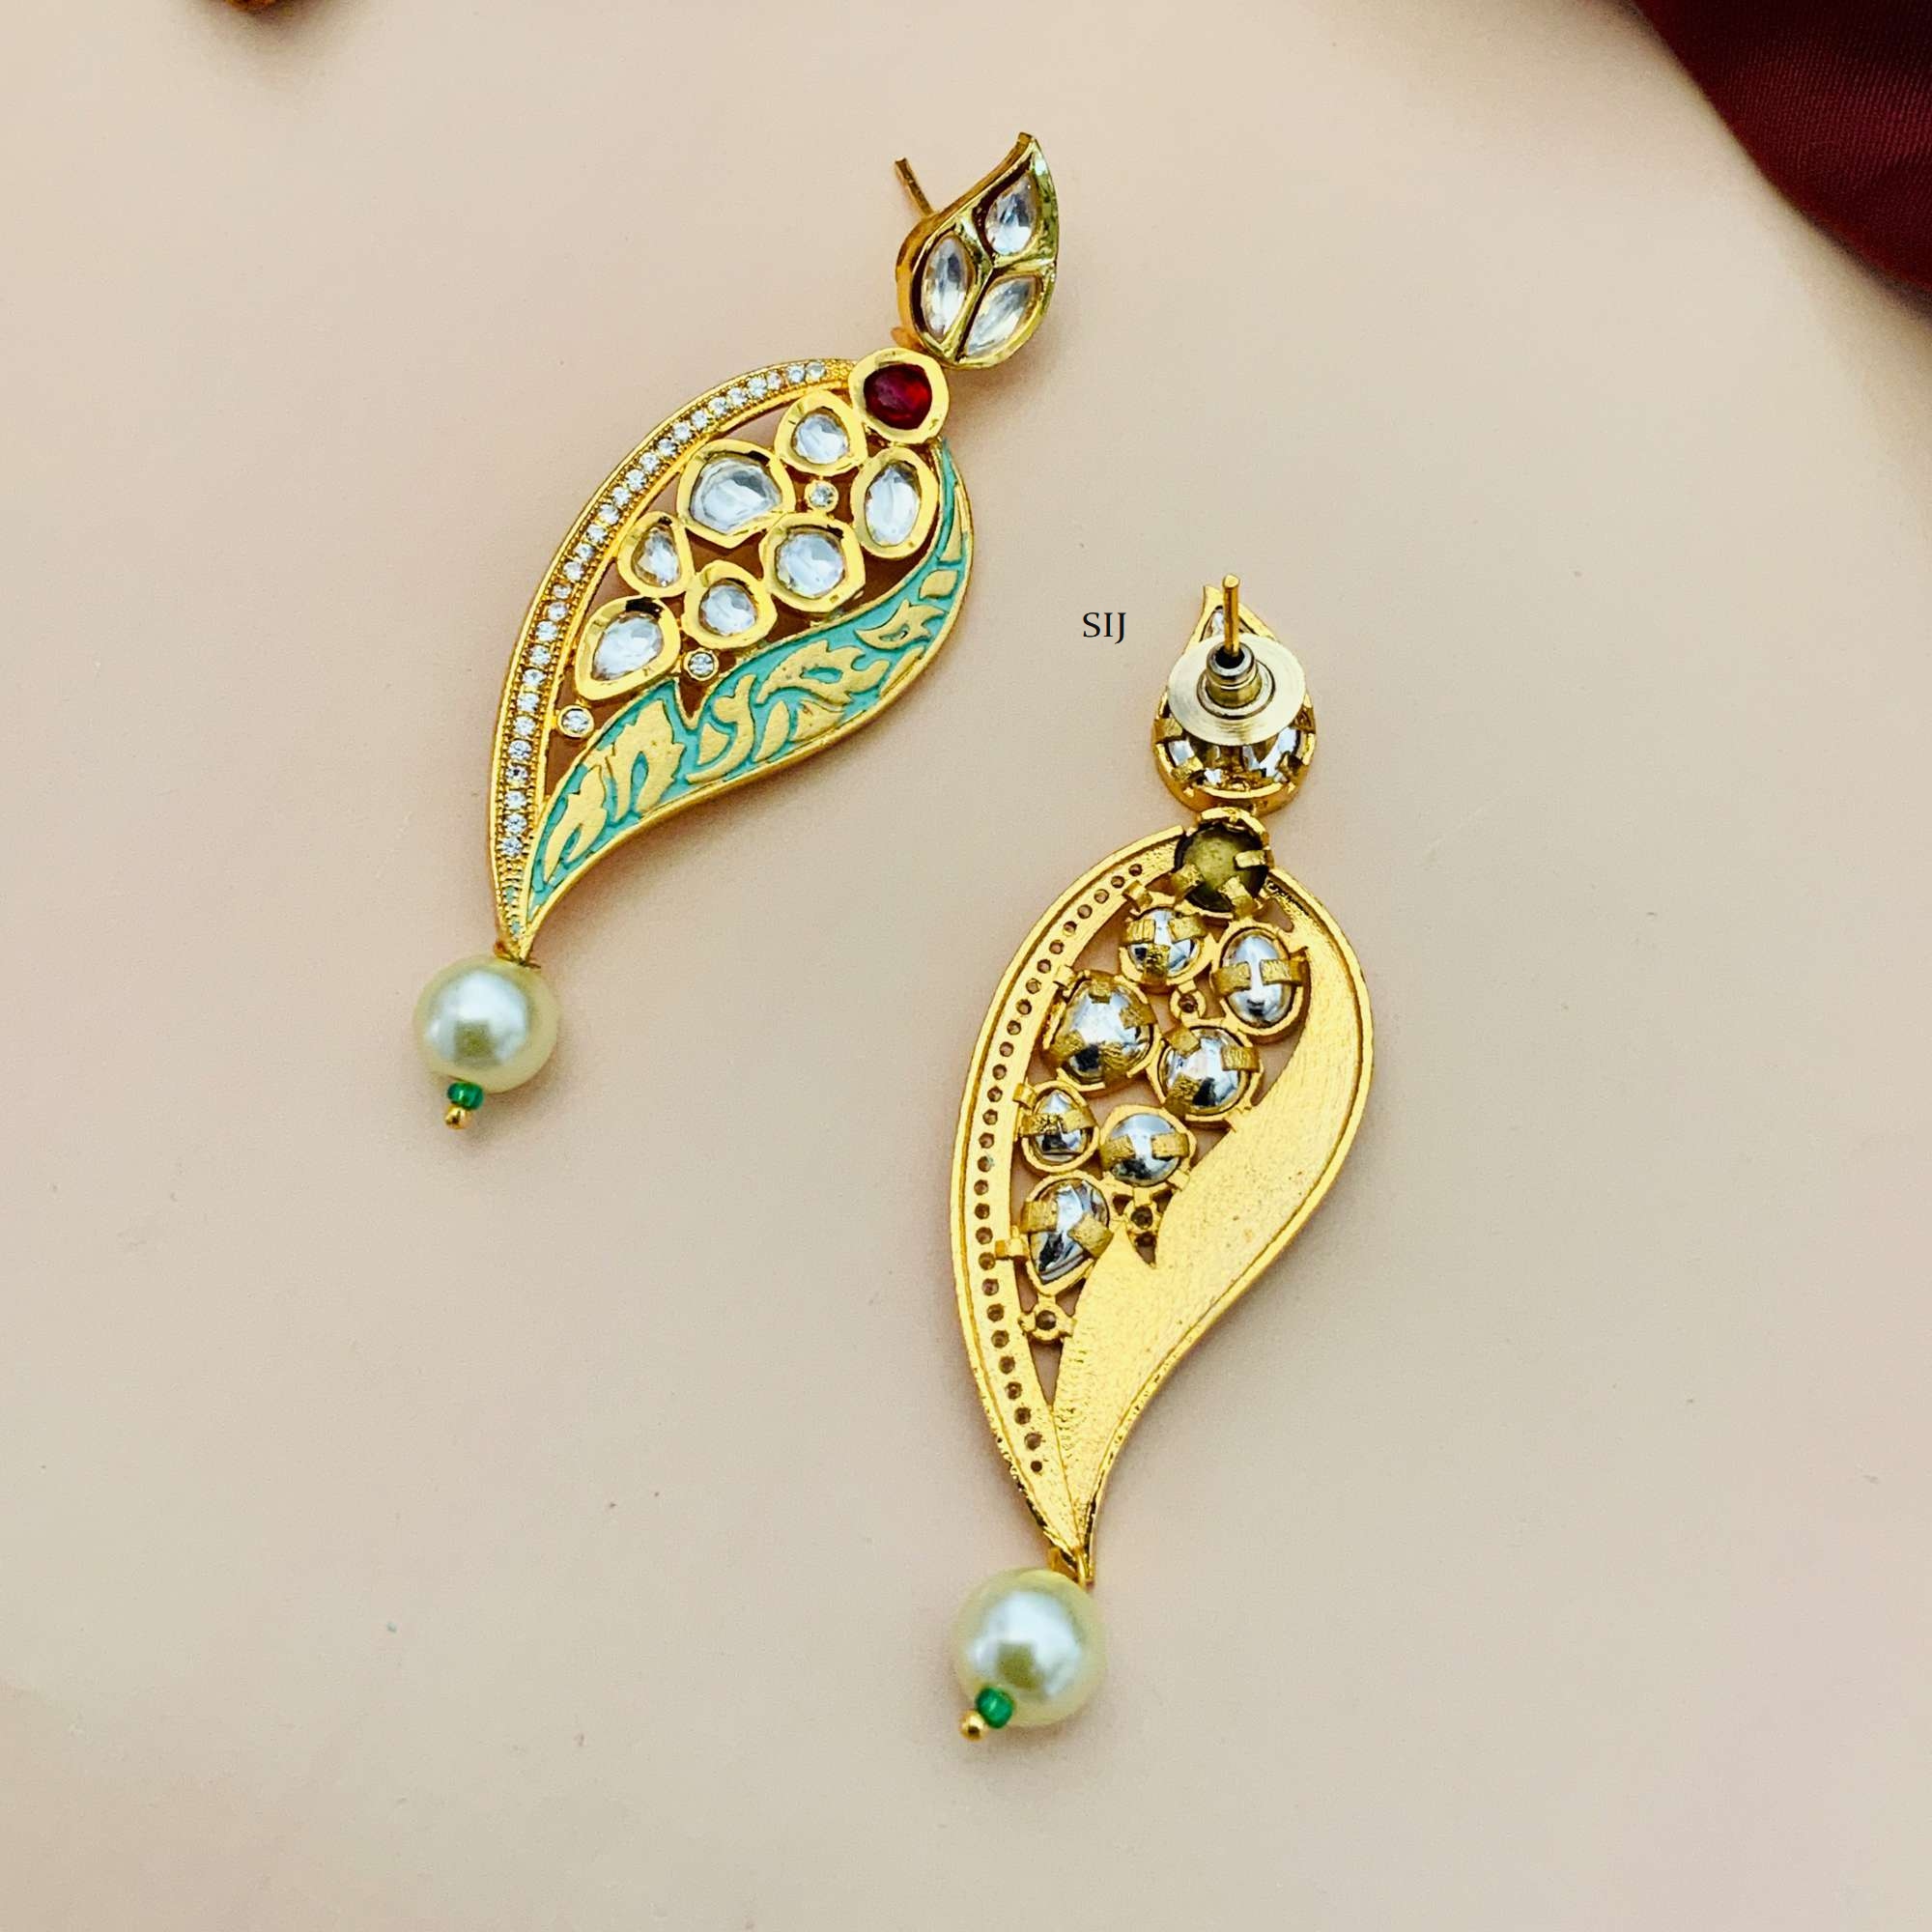 Matte Finish Leaf Design Kundan Earrings with Red Stone